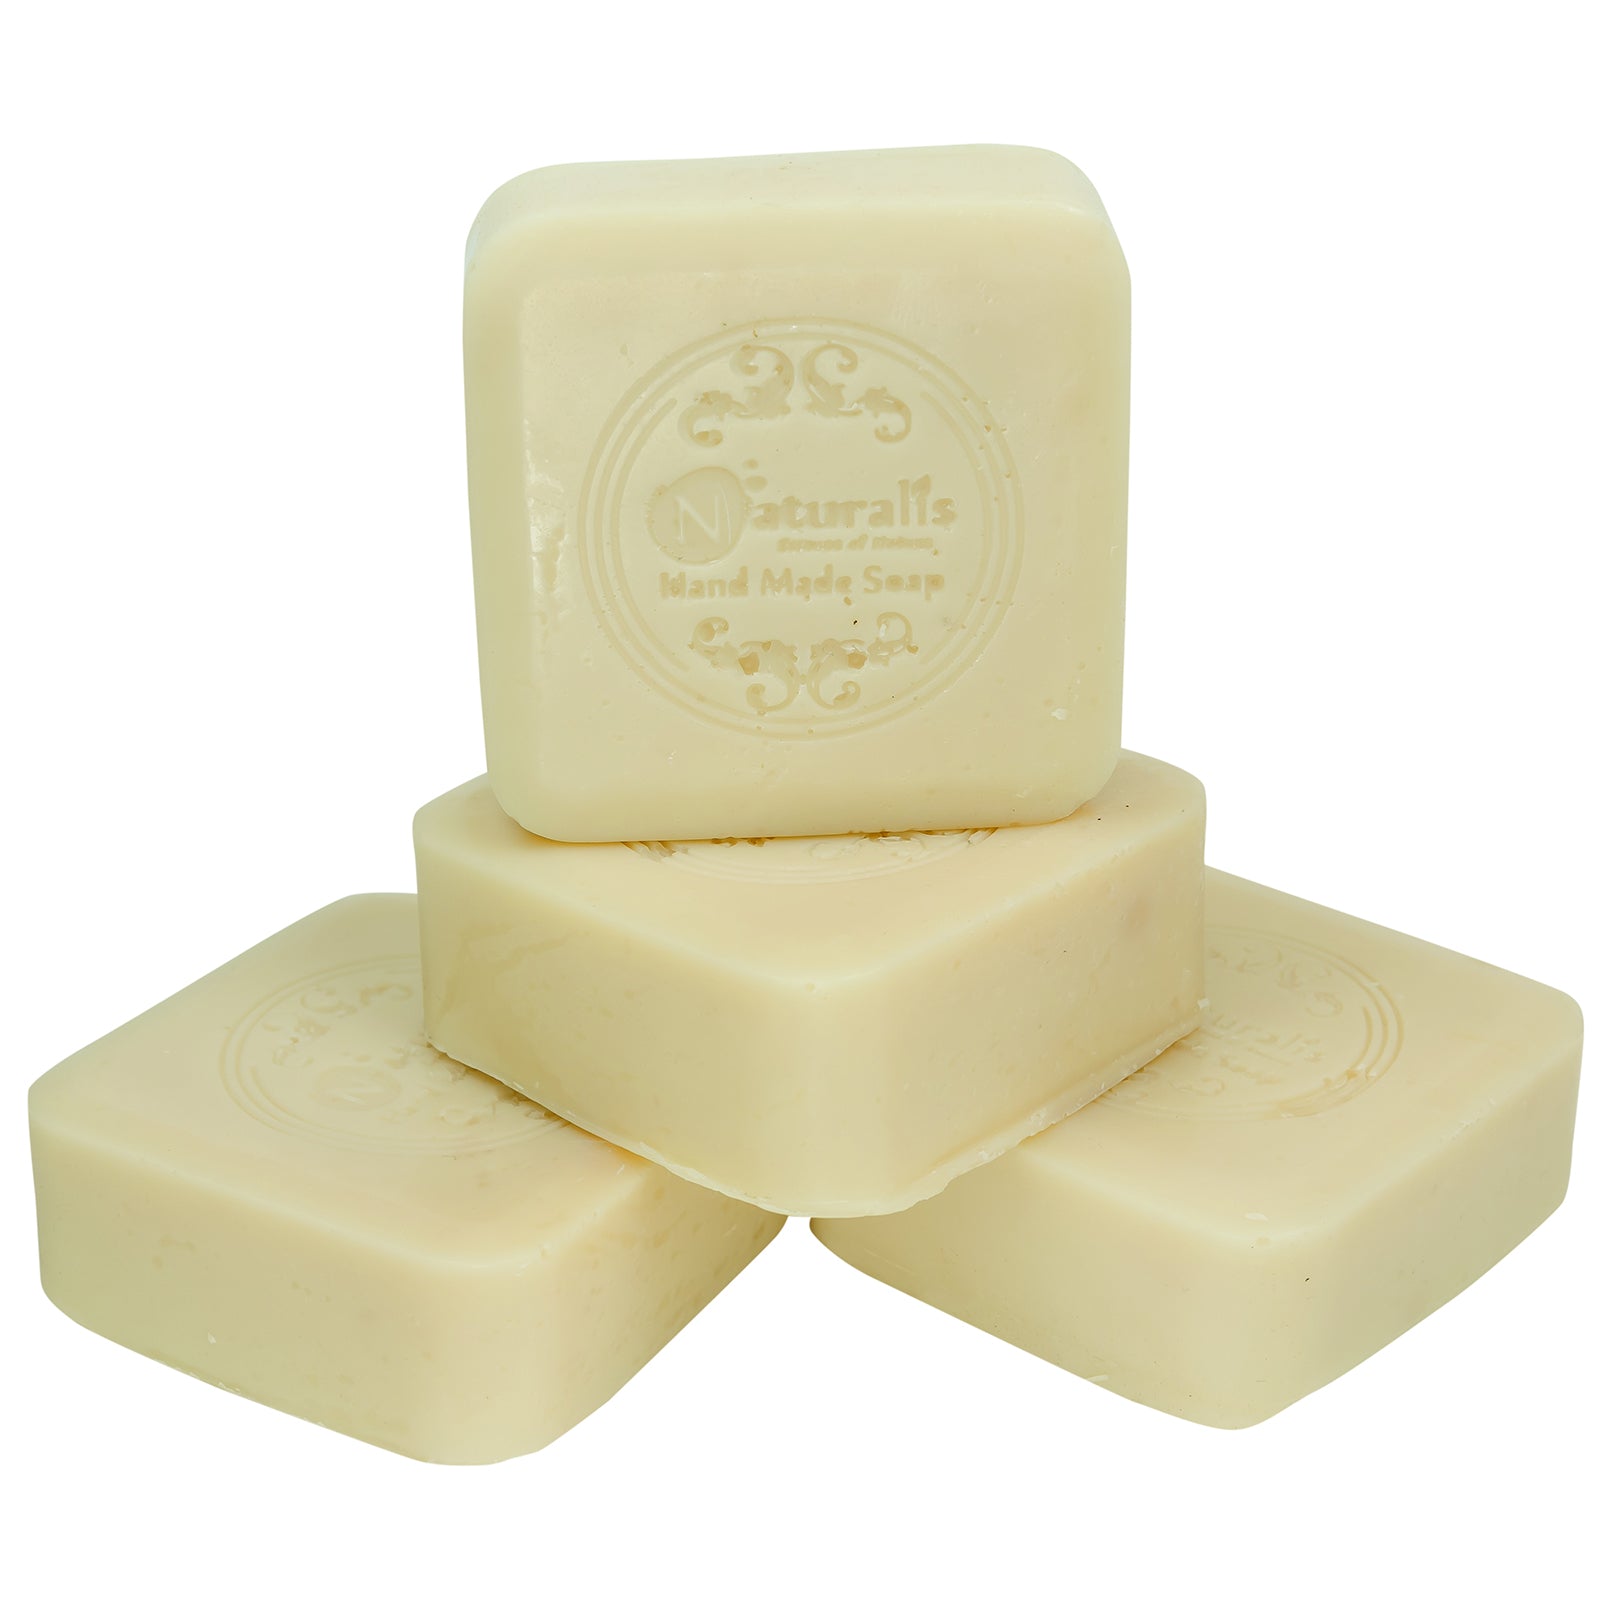 Hand-Milled Luxury Geranium Solid Soap Bar, Made using century-old Cold Process Method - 100gms Pack of 4